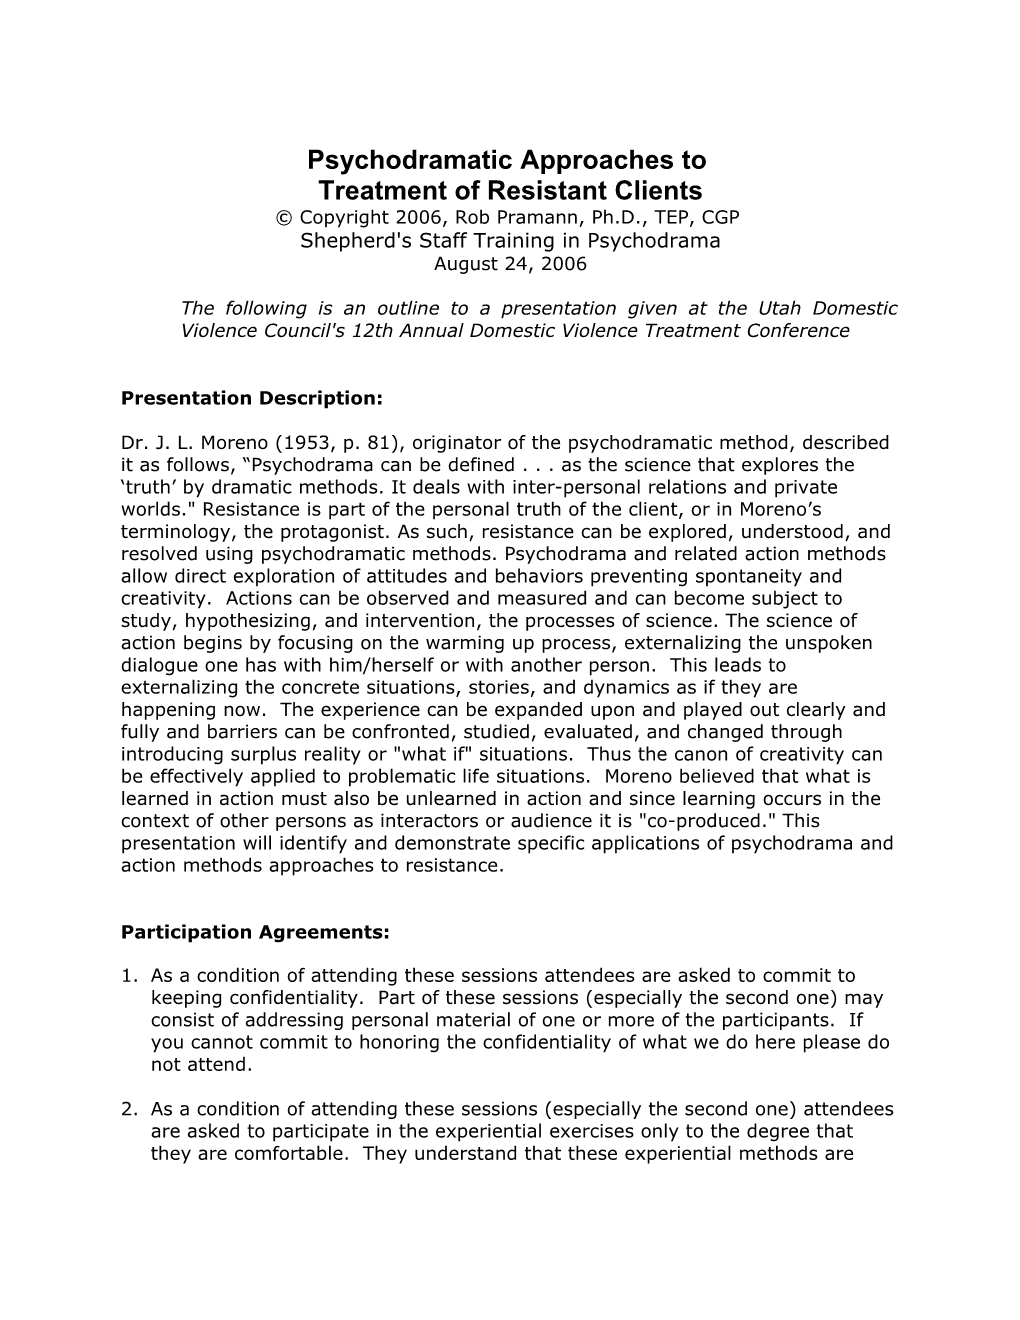 Psychodramatic Approaches to Treatment of Resistant Clients